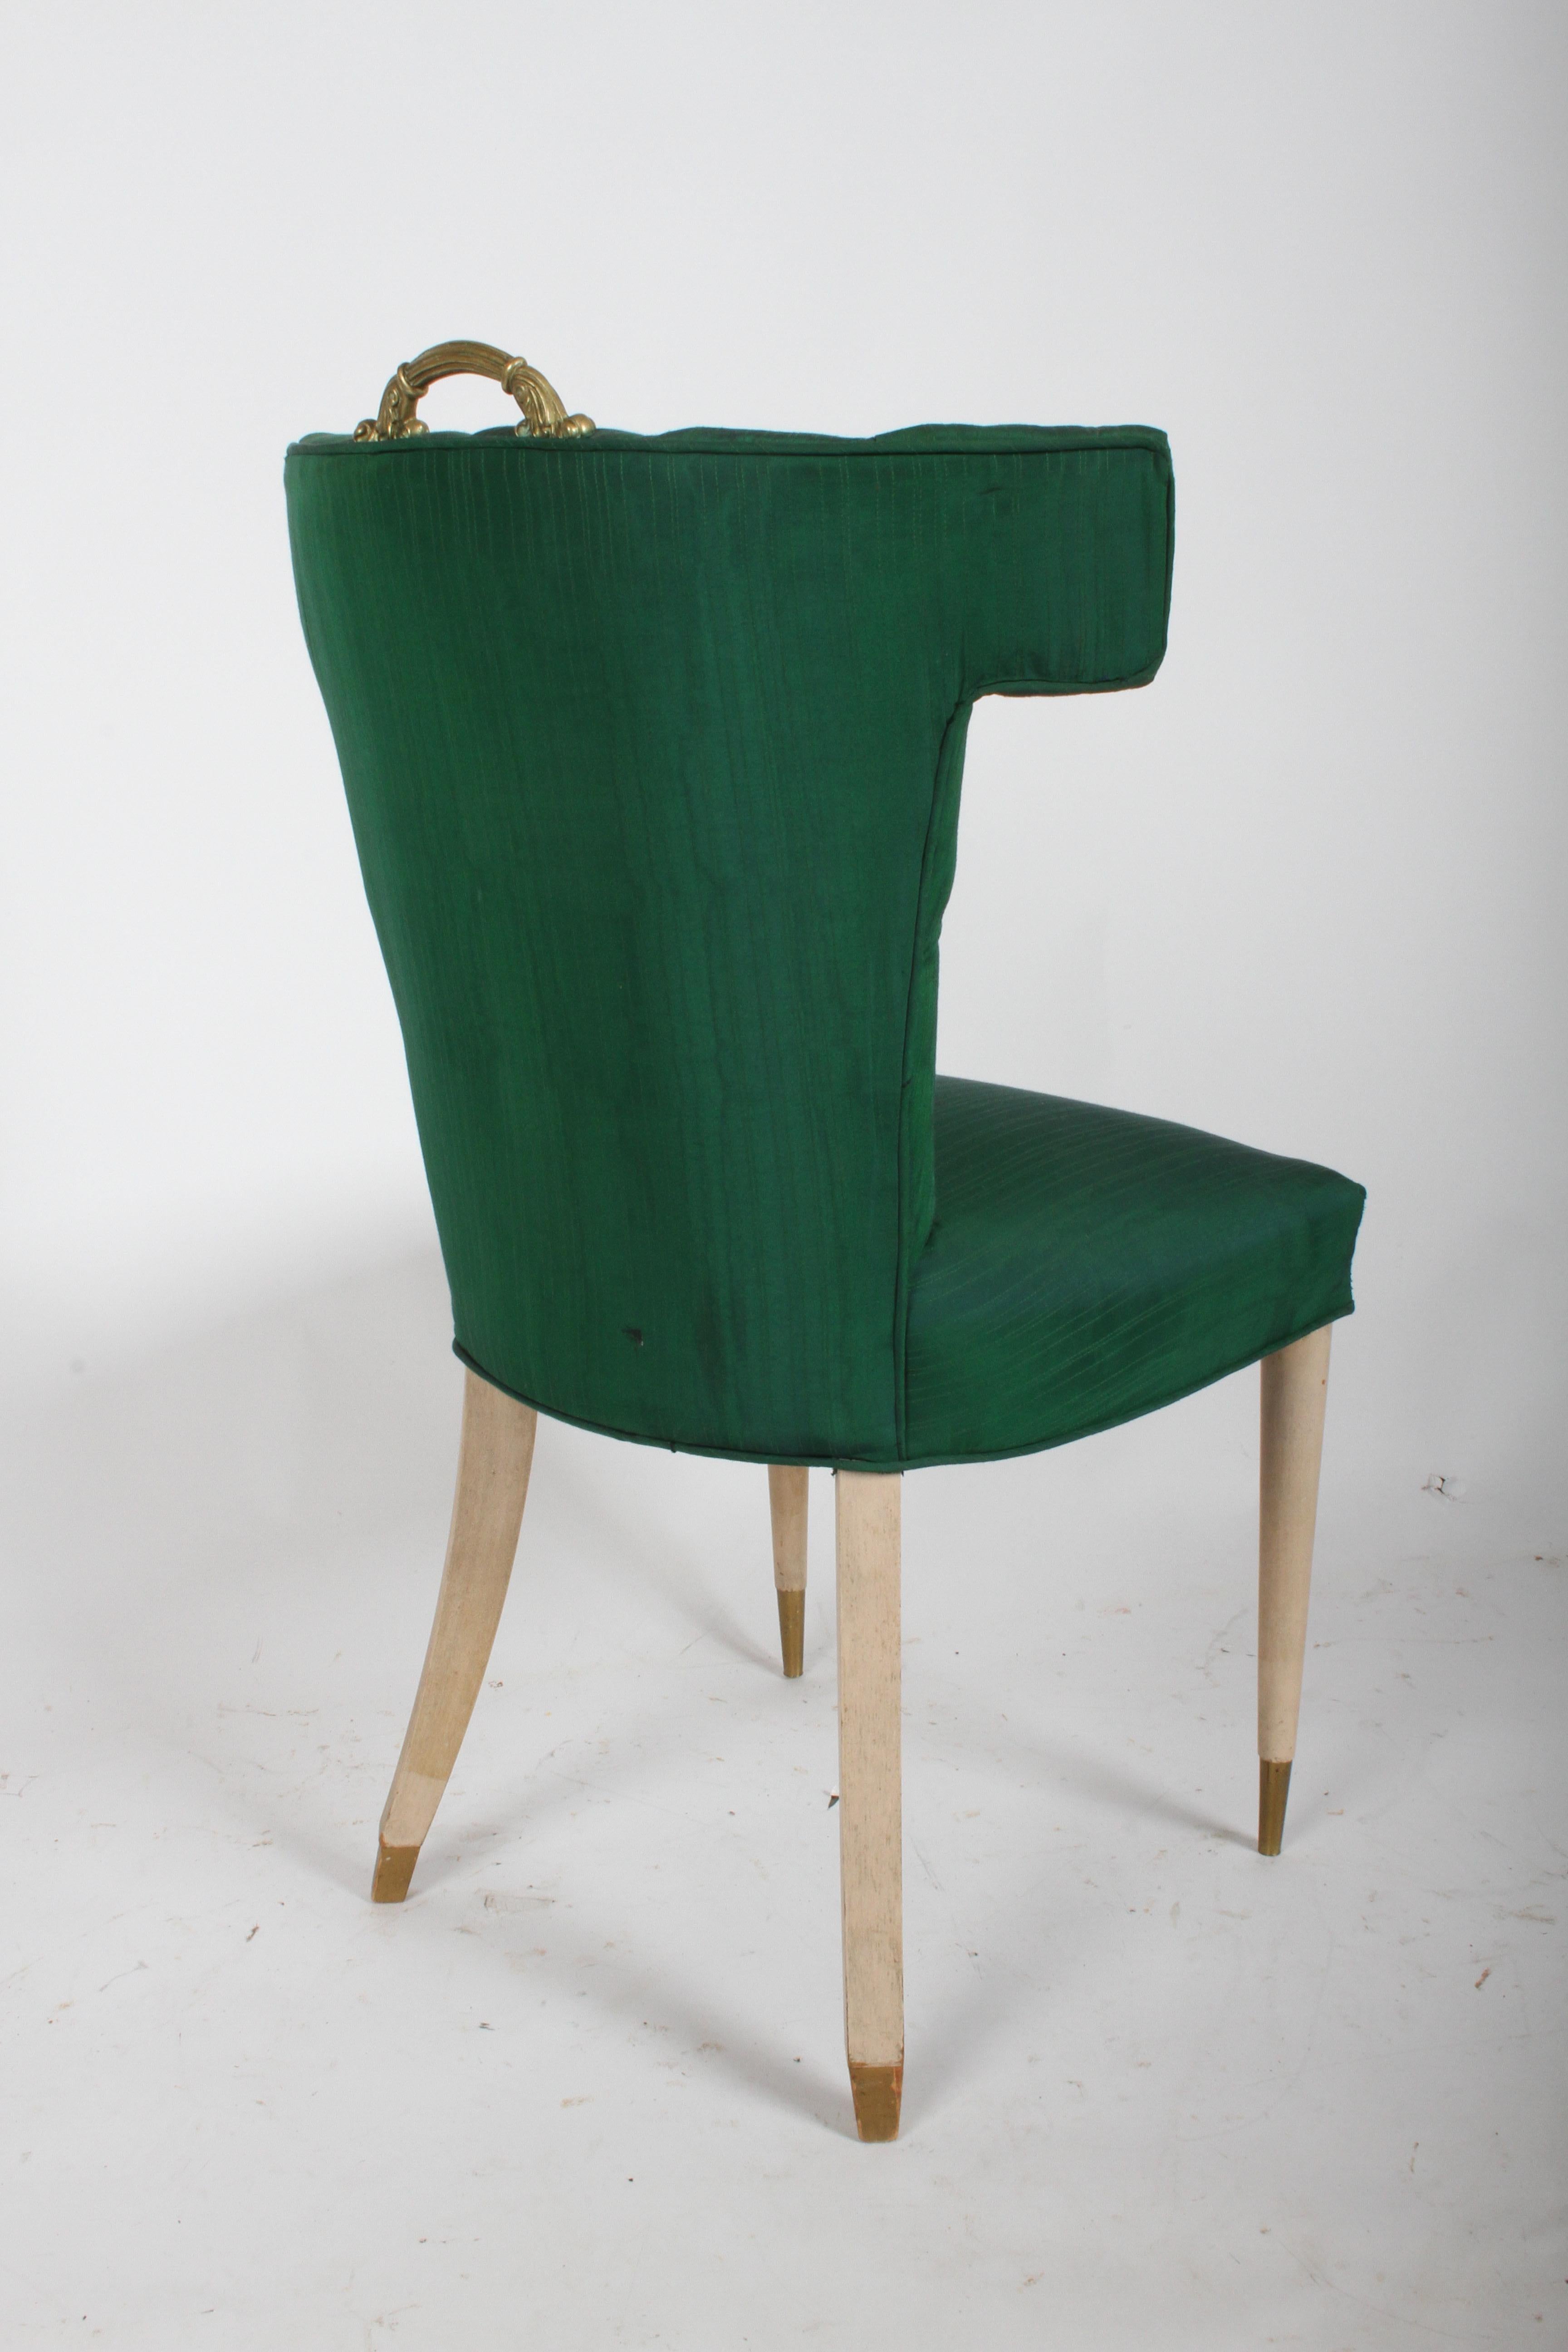 Satz von 6 1940s Hollywood Regency Tufted Curved Back Dining Chair Messing Griffe  im Angebot 7